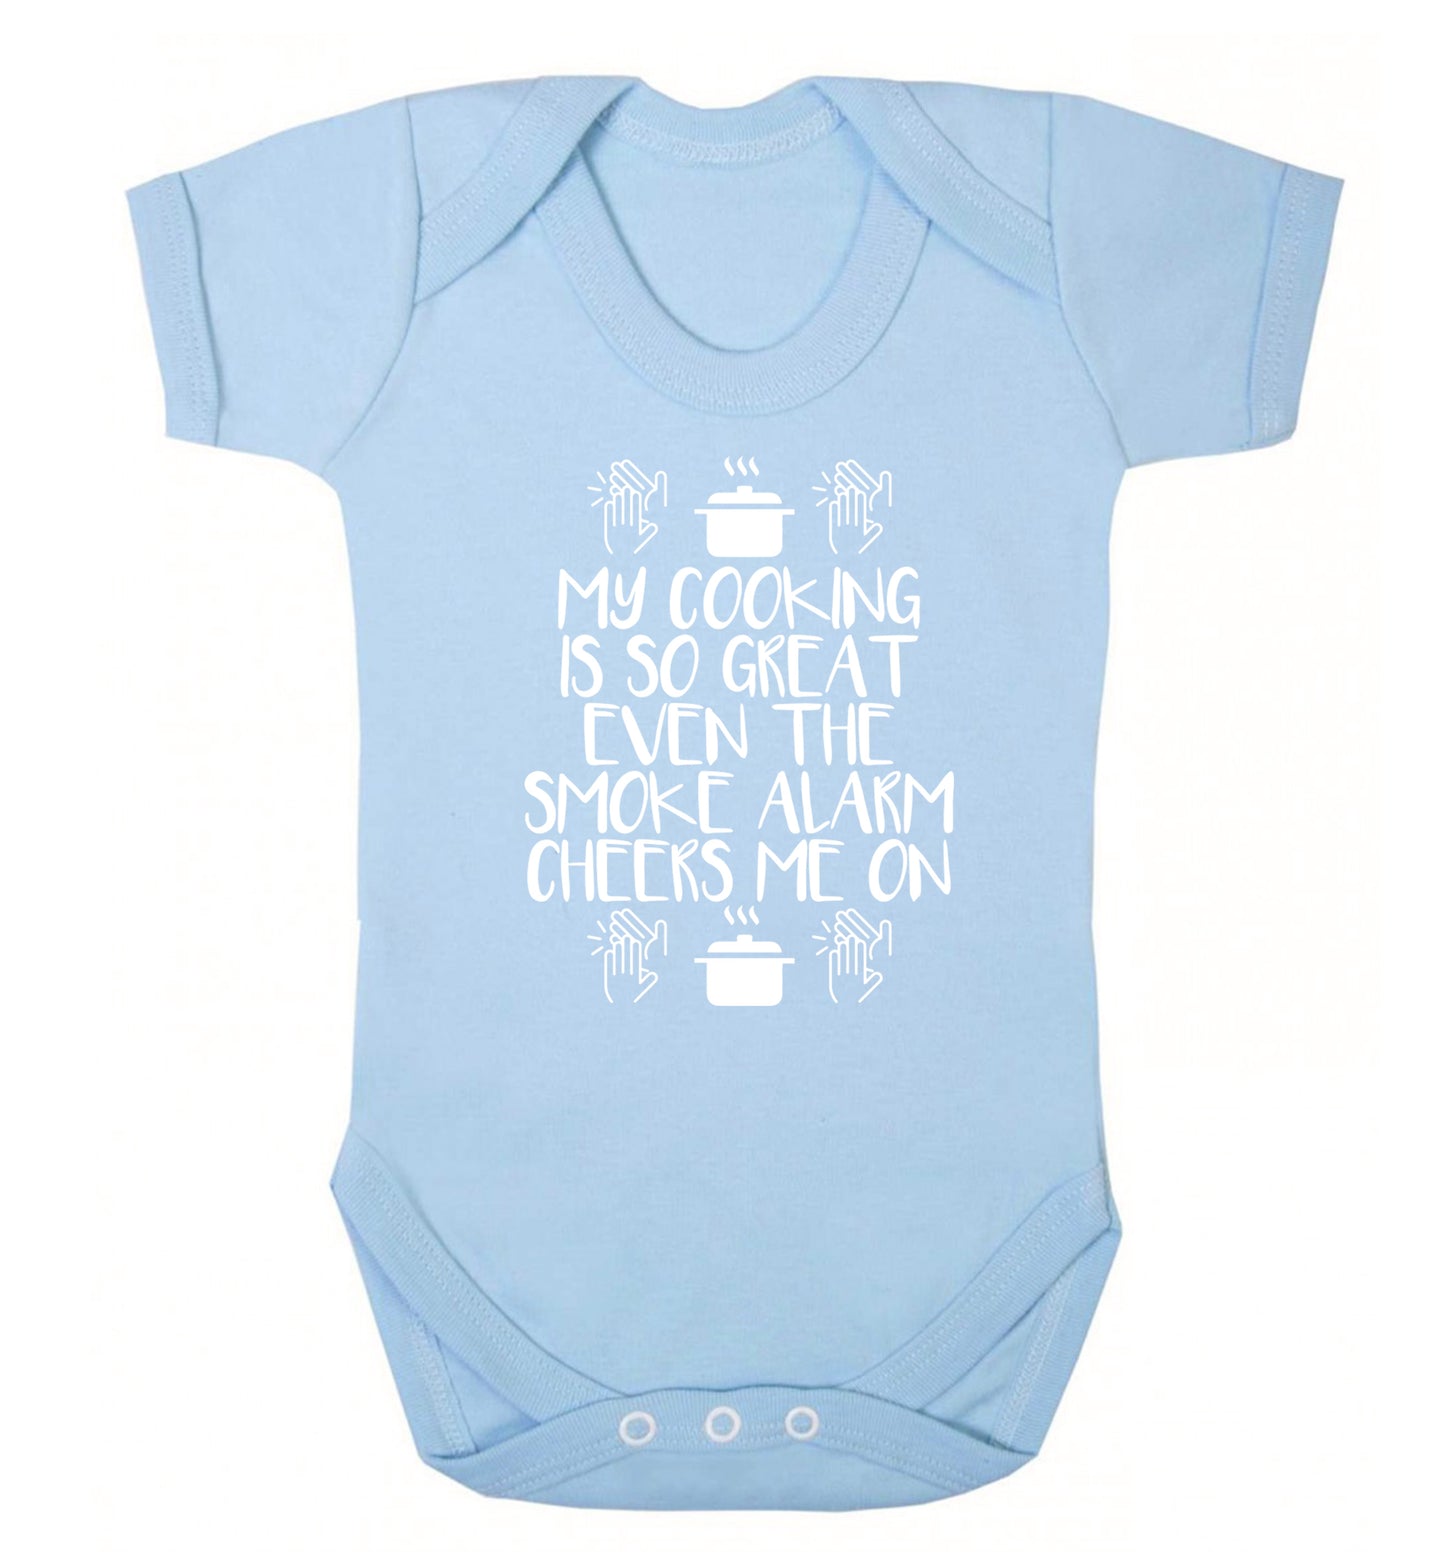 My cooking is so great even the smoke alarm cheers me on! Baby Vest pale blue 18-24 months